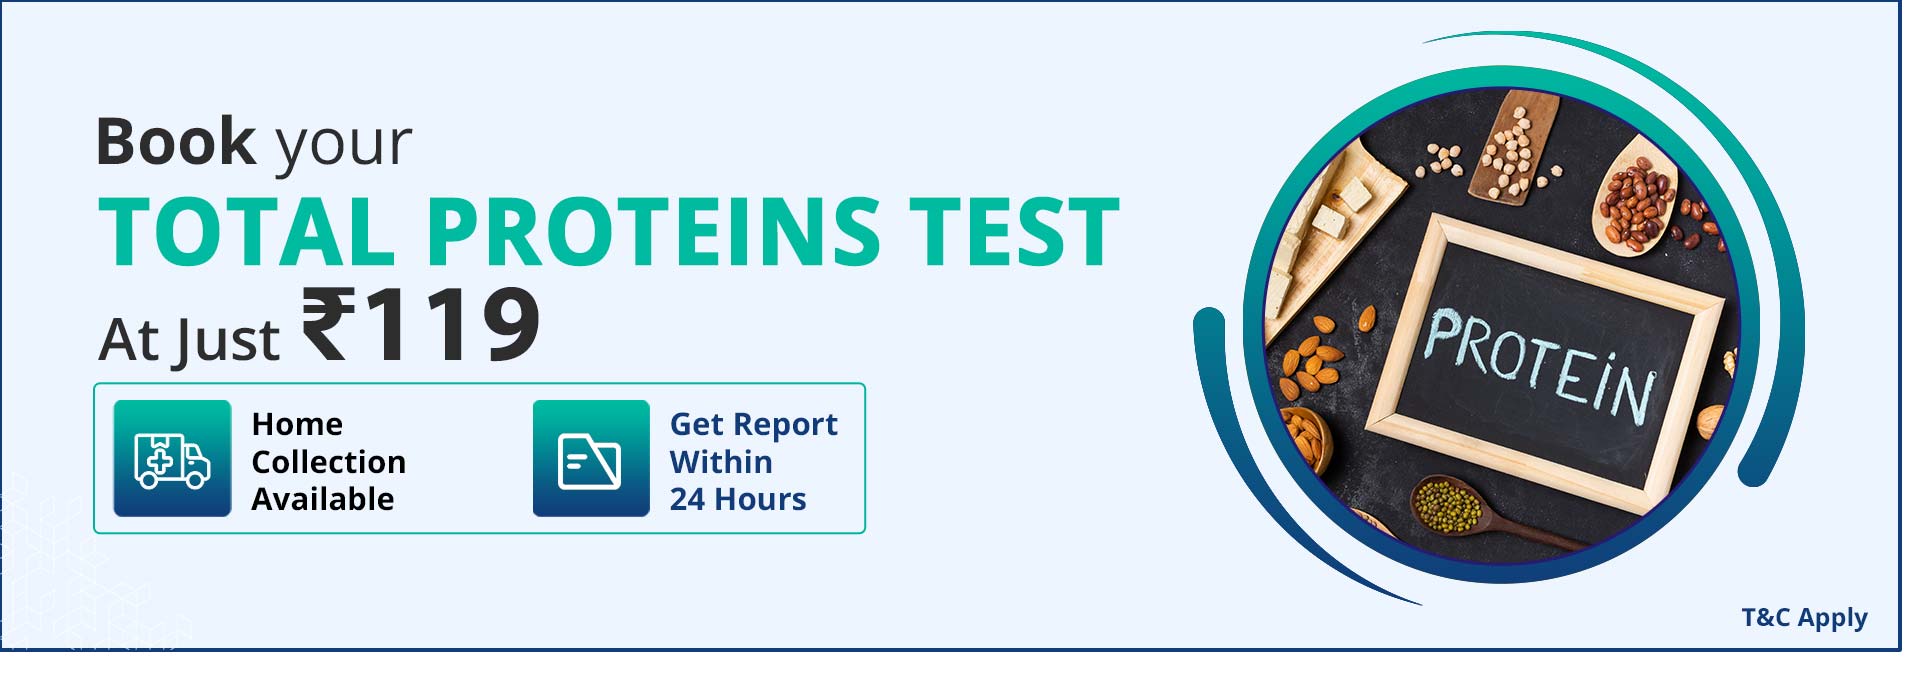 Total Proteins Test